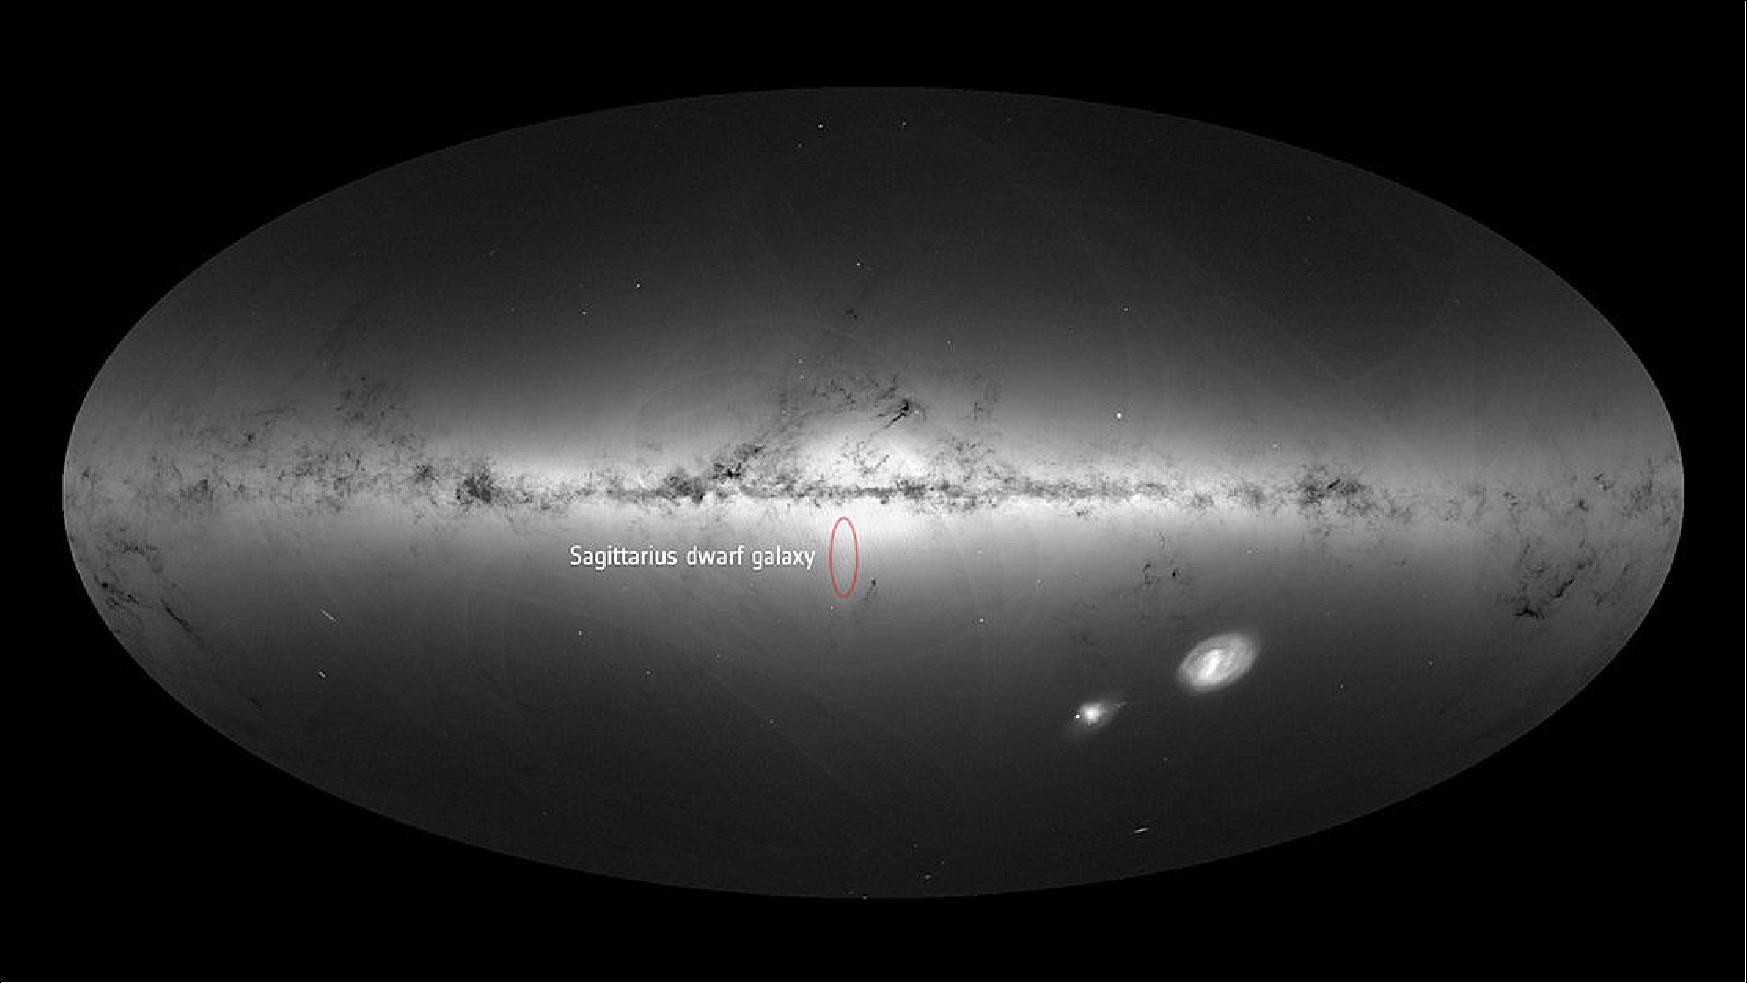 Figure 40: The Sagittarius dwarf galaxy in Gaia's all-sky view. The Sagittarius dwarf galaxy, a small satellite of the Milky Way that is leaving a stream of stars behind as an effect of our Galaxy's gravitational tug, is visible as an elongated feature below the Galactic center and pointing in the downwards direction in the all-sky map of the density of stars observed by ESA's Gaia mission between July 2014 to May 2016 (image credit: ESA/Gaia/DPAC)